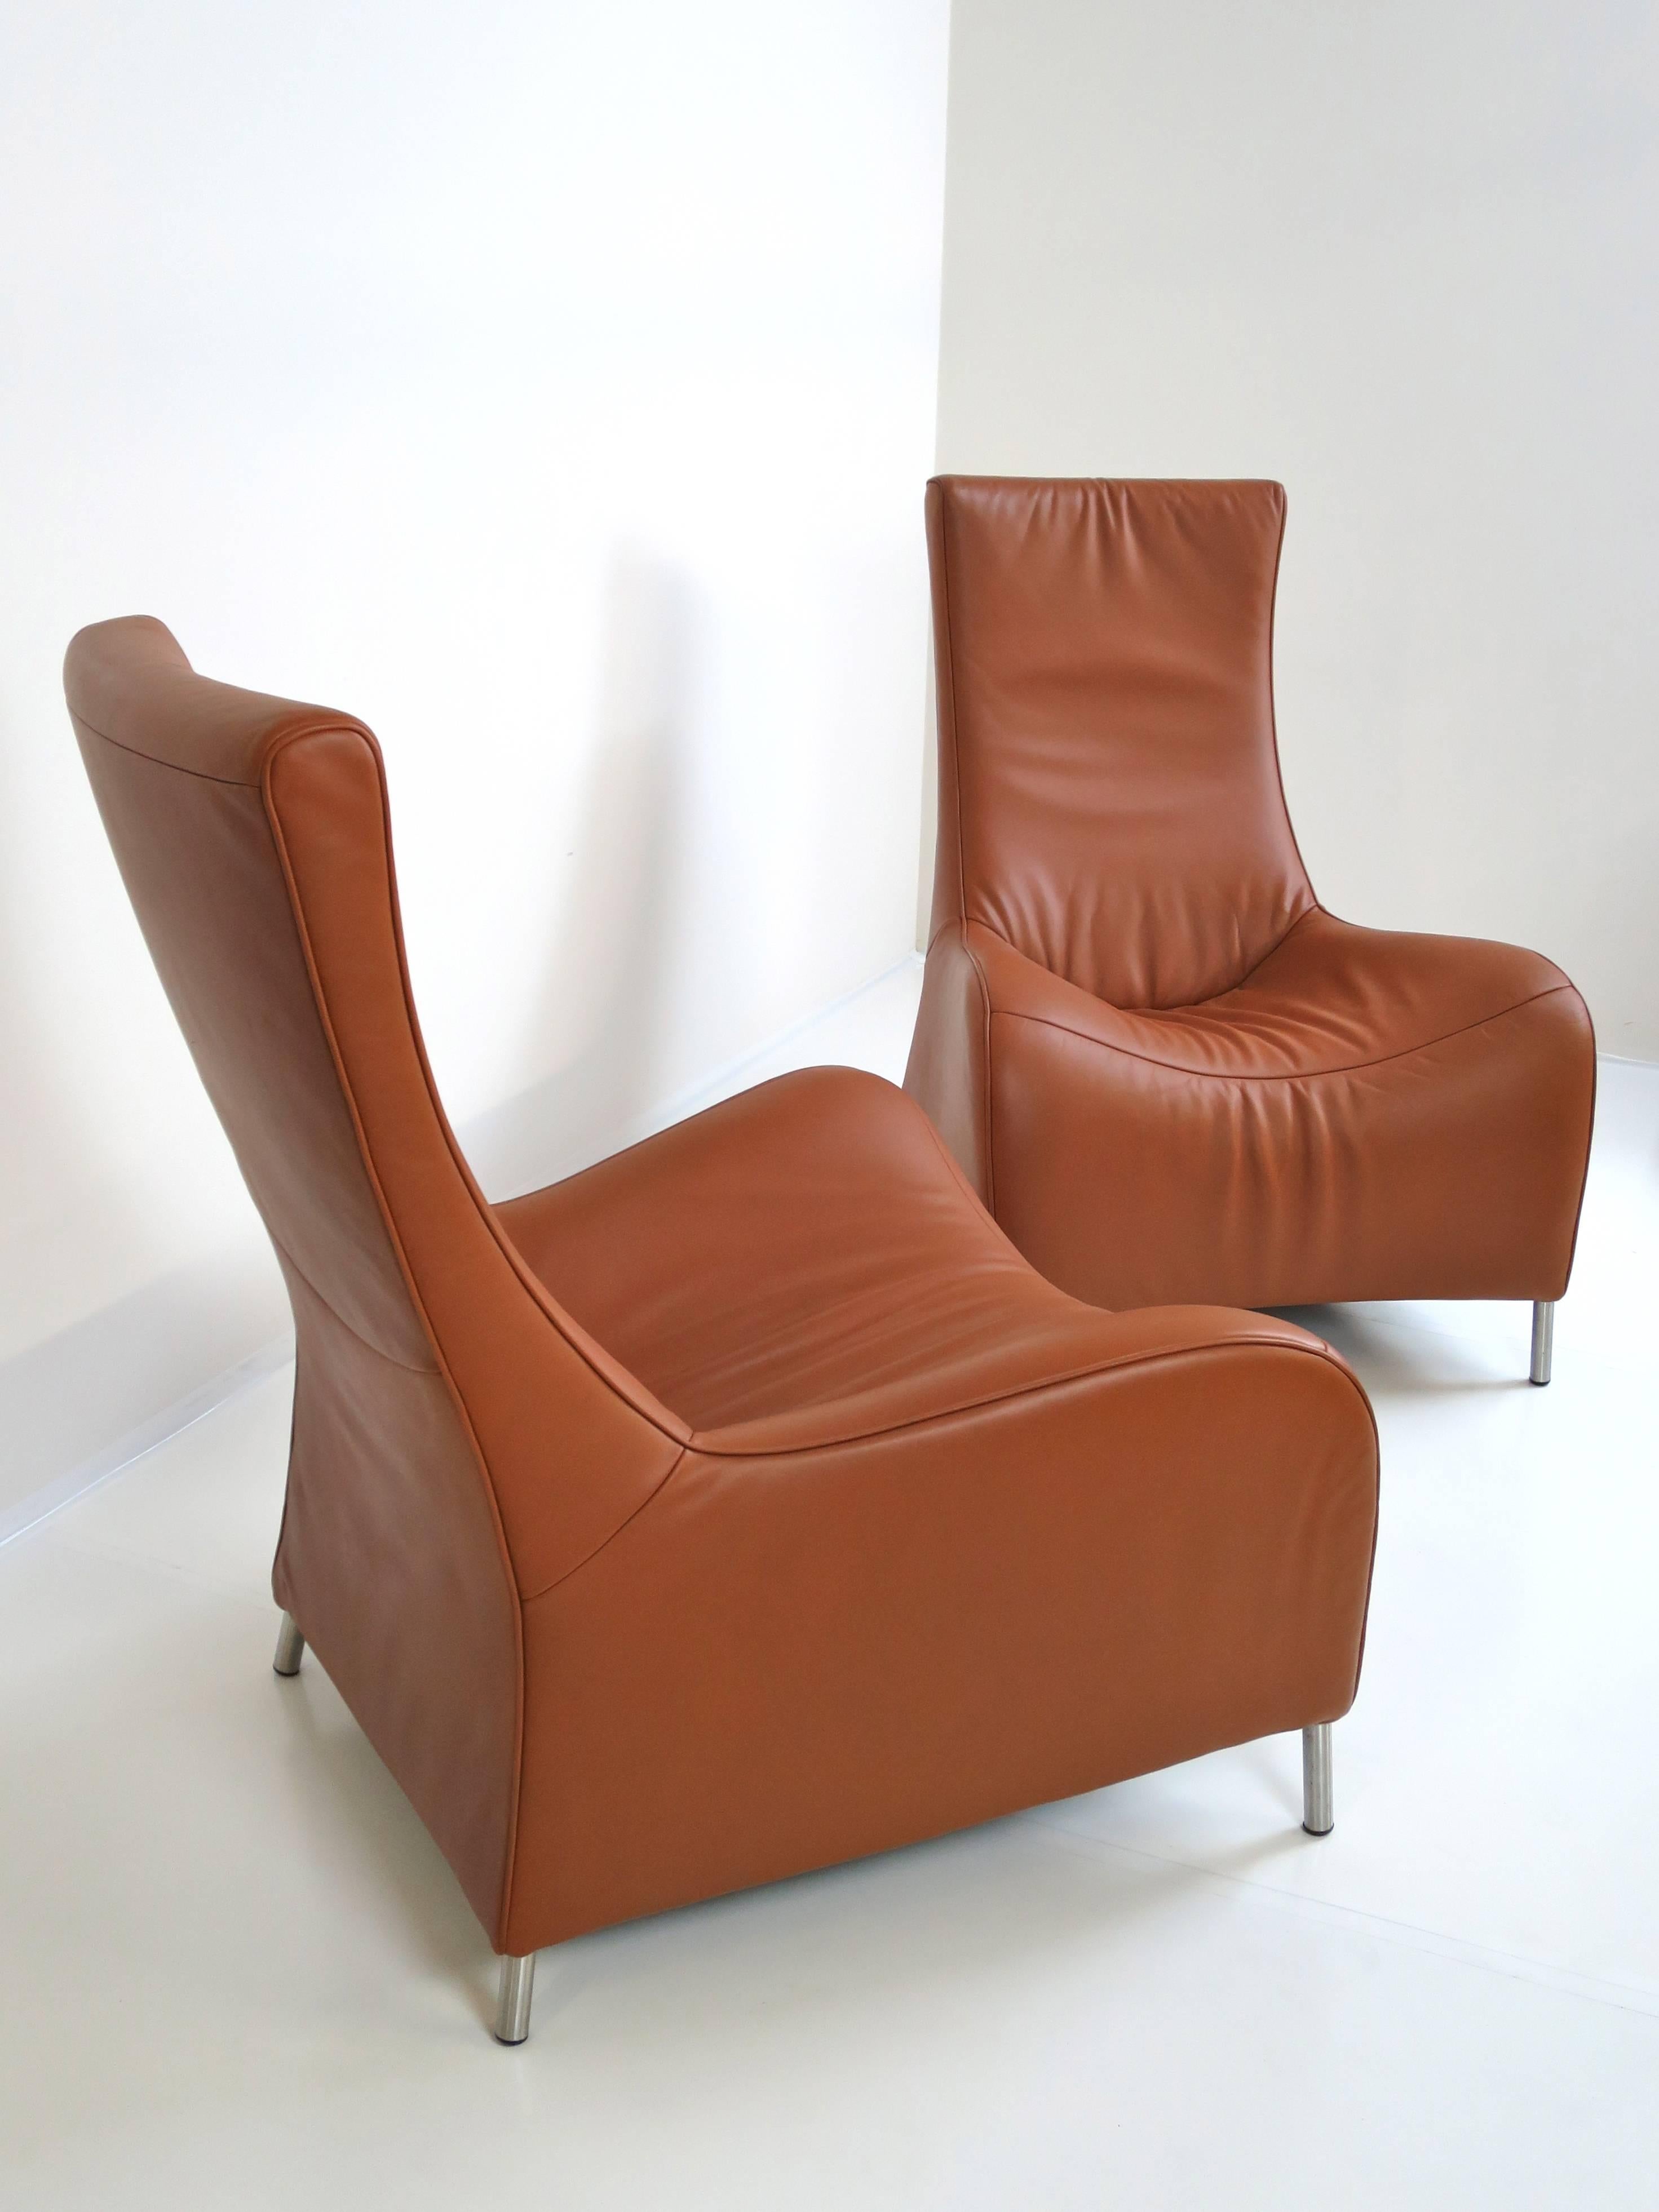 Pair of De Sede DS 264 High Back Lounge Chairs by Matthias Hoffmann In Good Condition For Sale In San Diego, CA